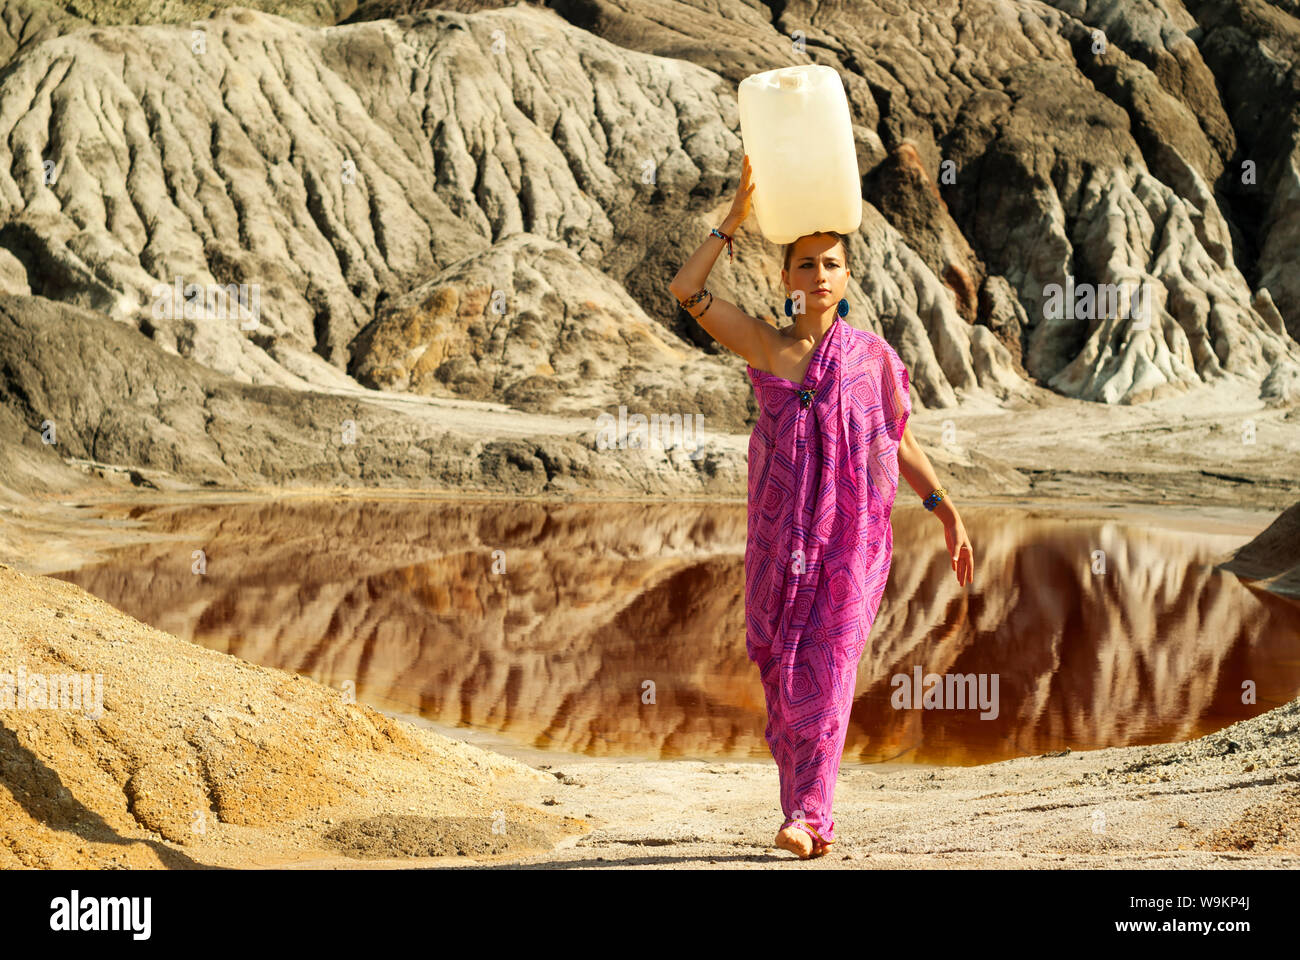 girl of oriental appearance in a sari carries on her head a large plastic canister  with water over a desert area Stock Photo